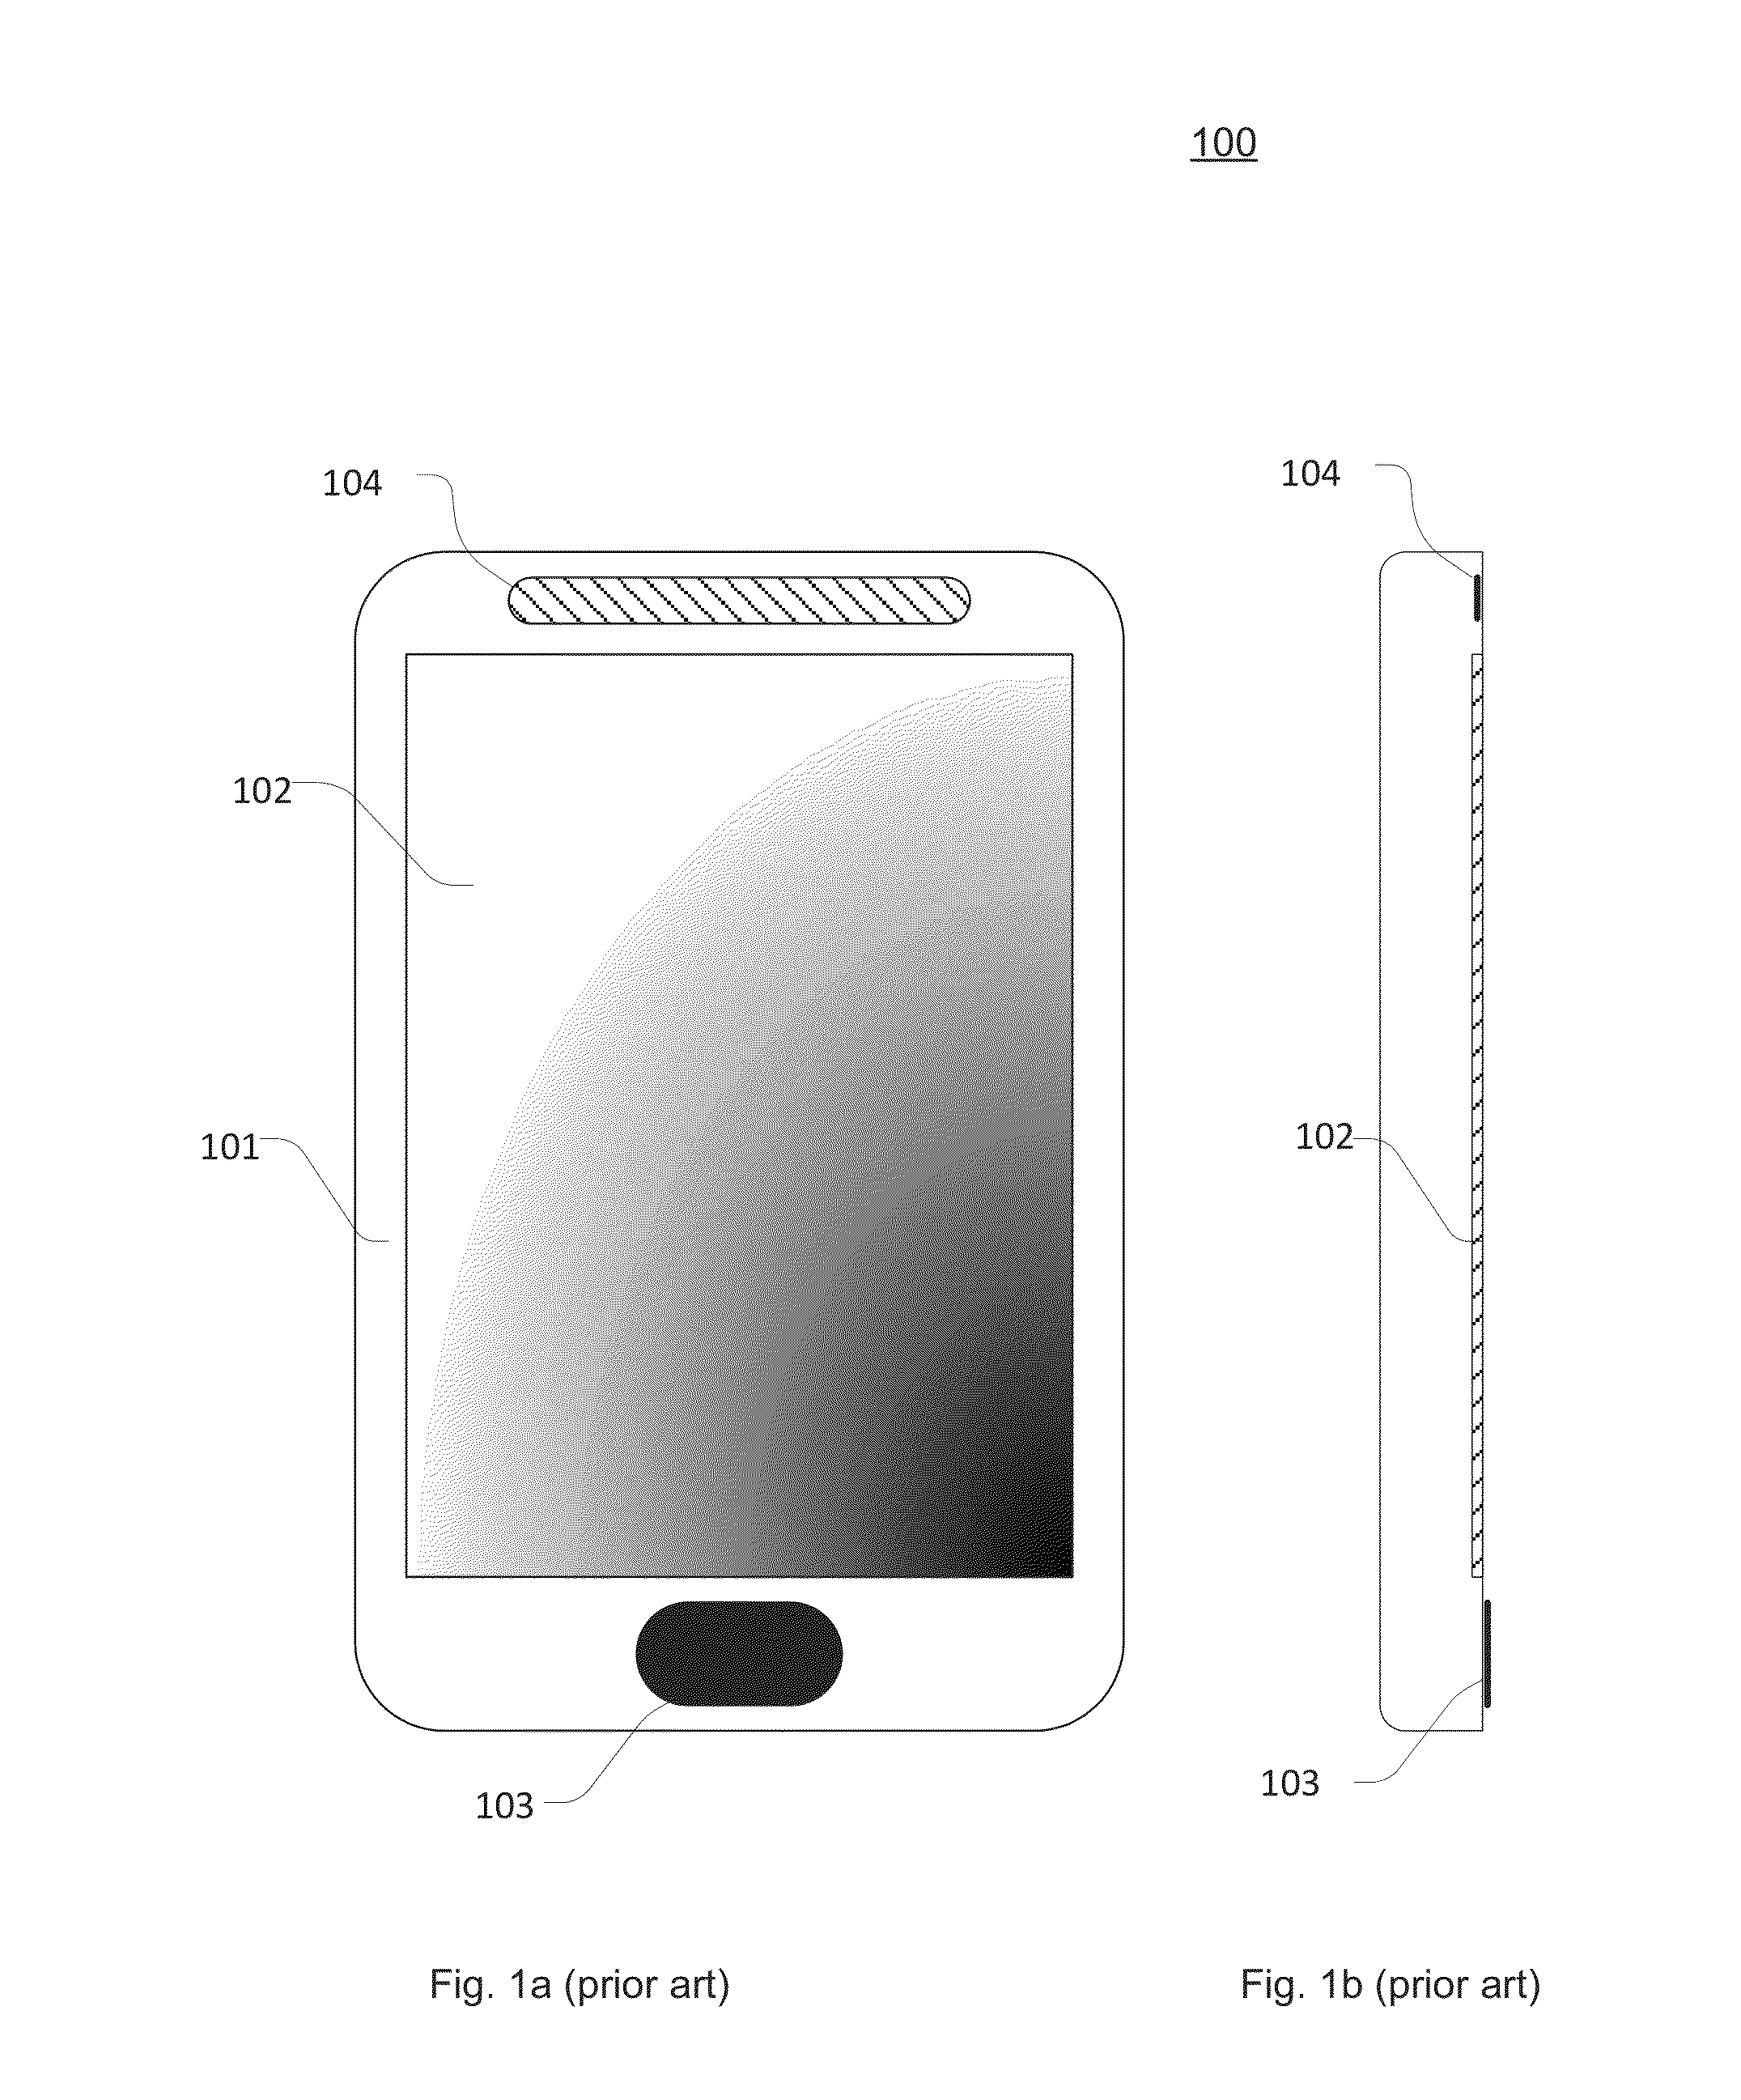 Mobile computing device with expanded display size